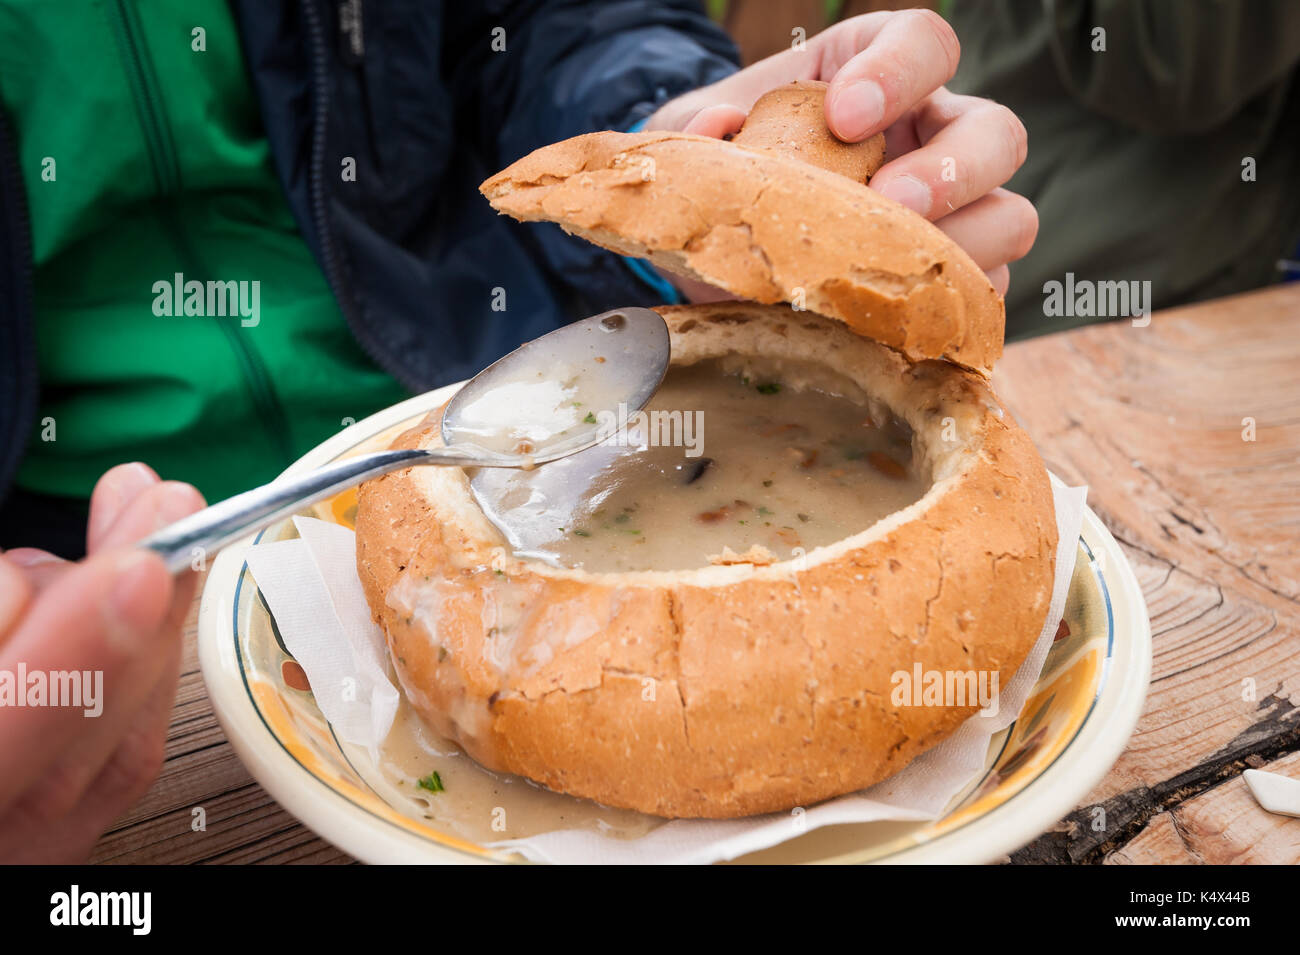 Creamy wild mushroom soup served in a bowl of bread. Typical mountain dish. Stock Photo